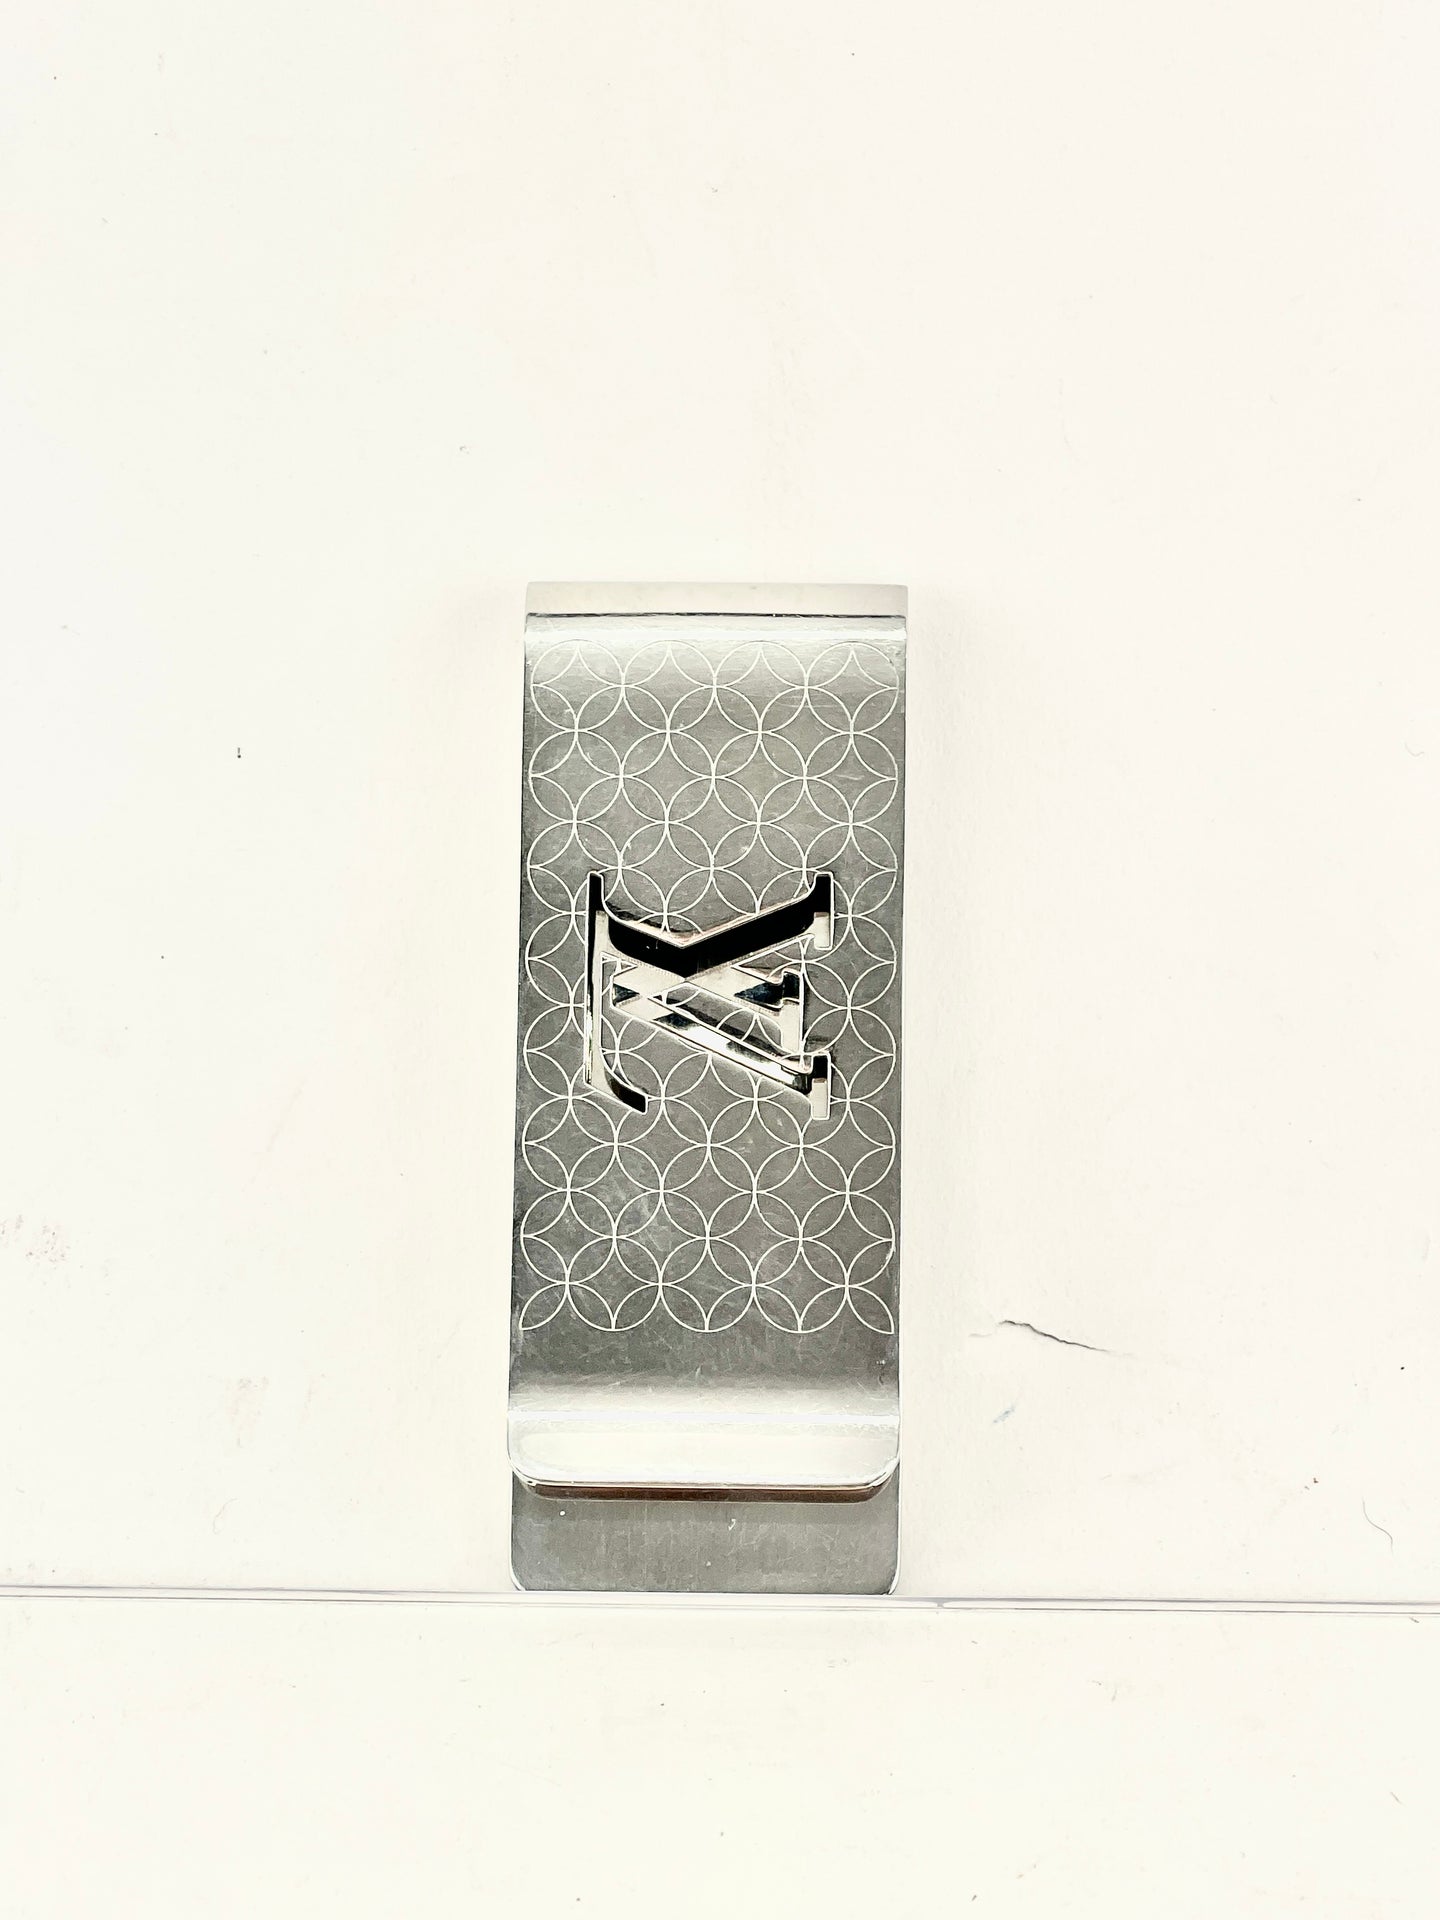 Champs Elysees Tie Pin Silver